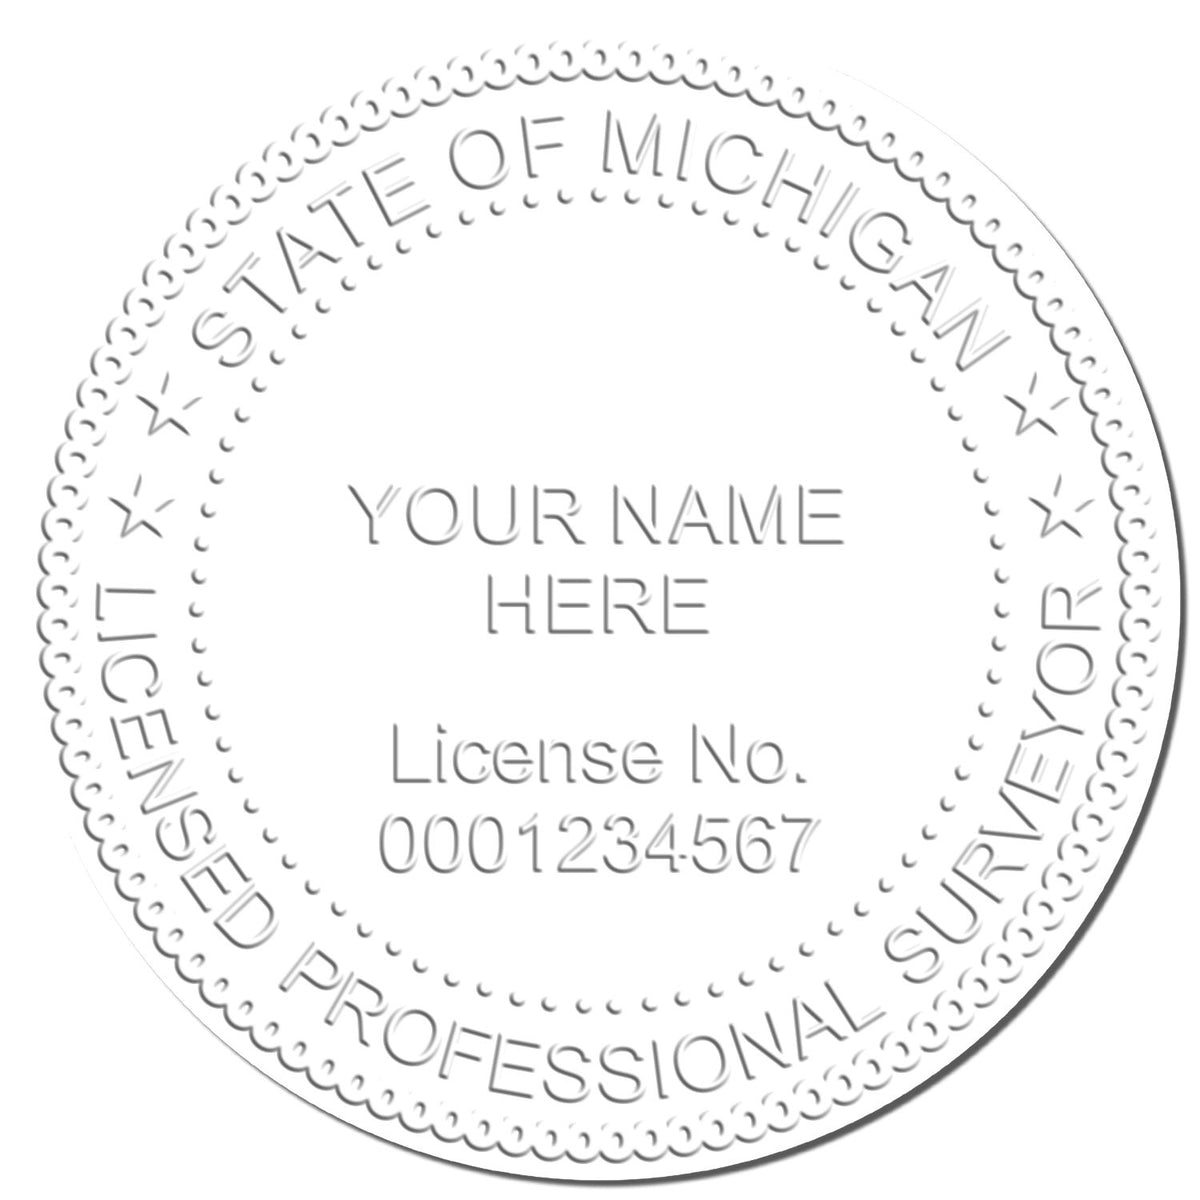 This paper is stamped with a sample imprint of the Heavy Duty Cast Iron Michigan Land Surveyor Seal Embosser, signifying its quality and reliability.